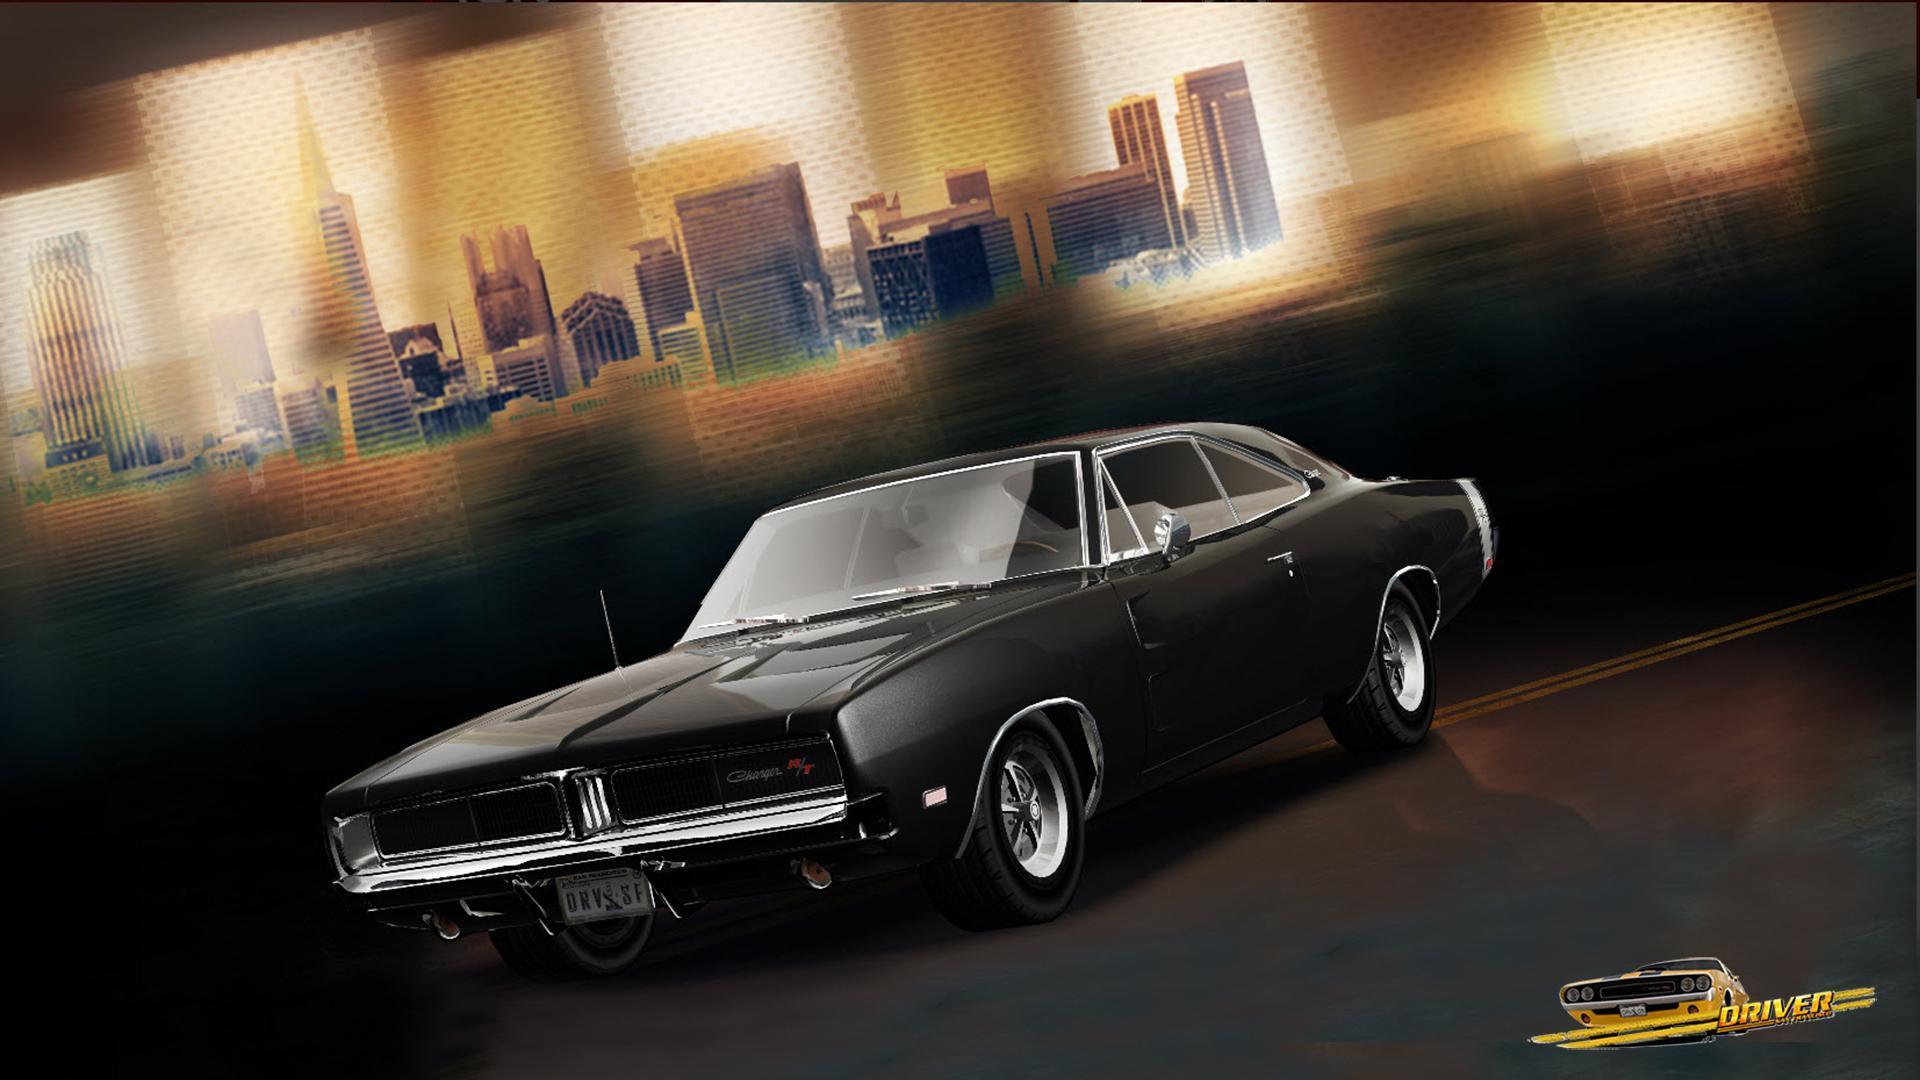 69 Dodge Charger Wallpapers - Wallpaper